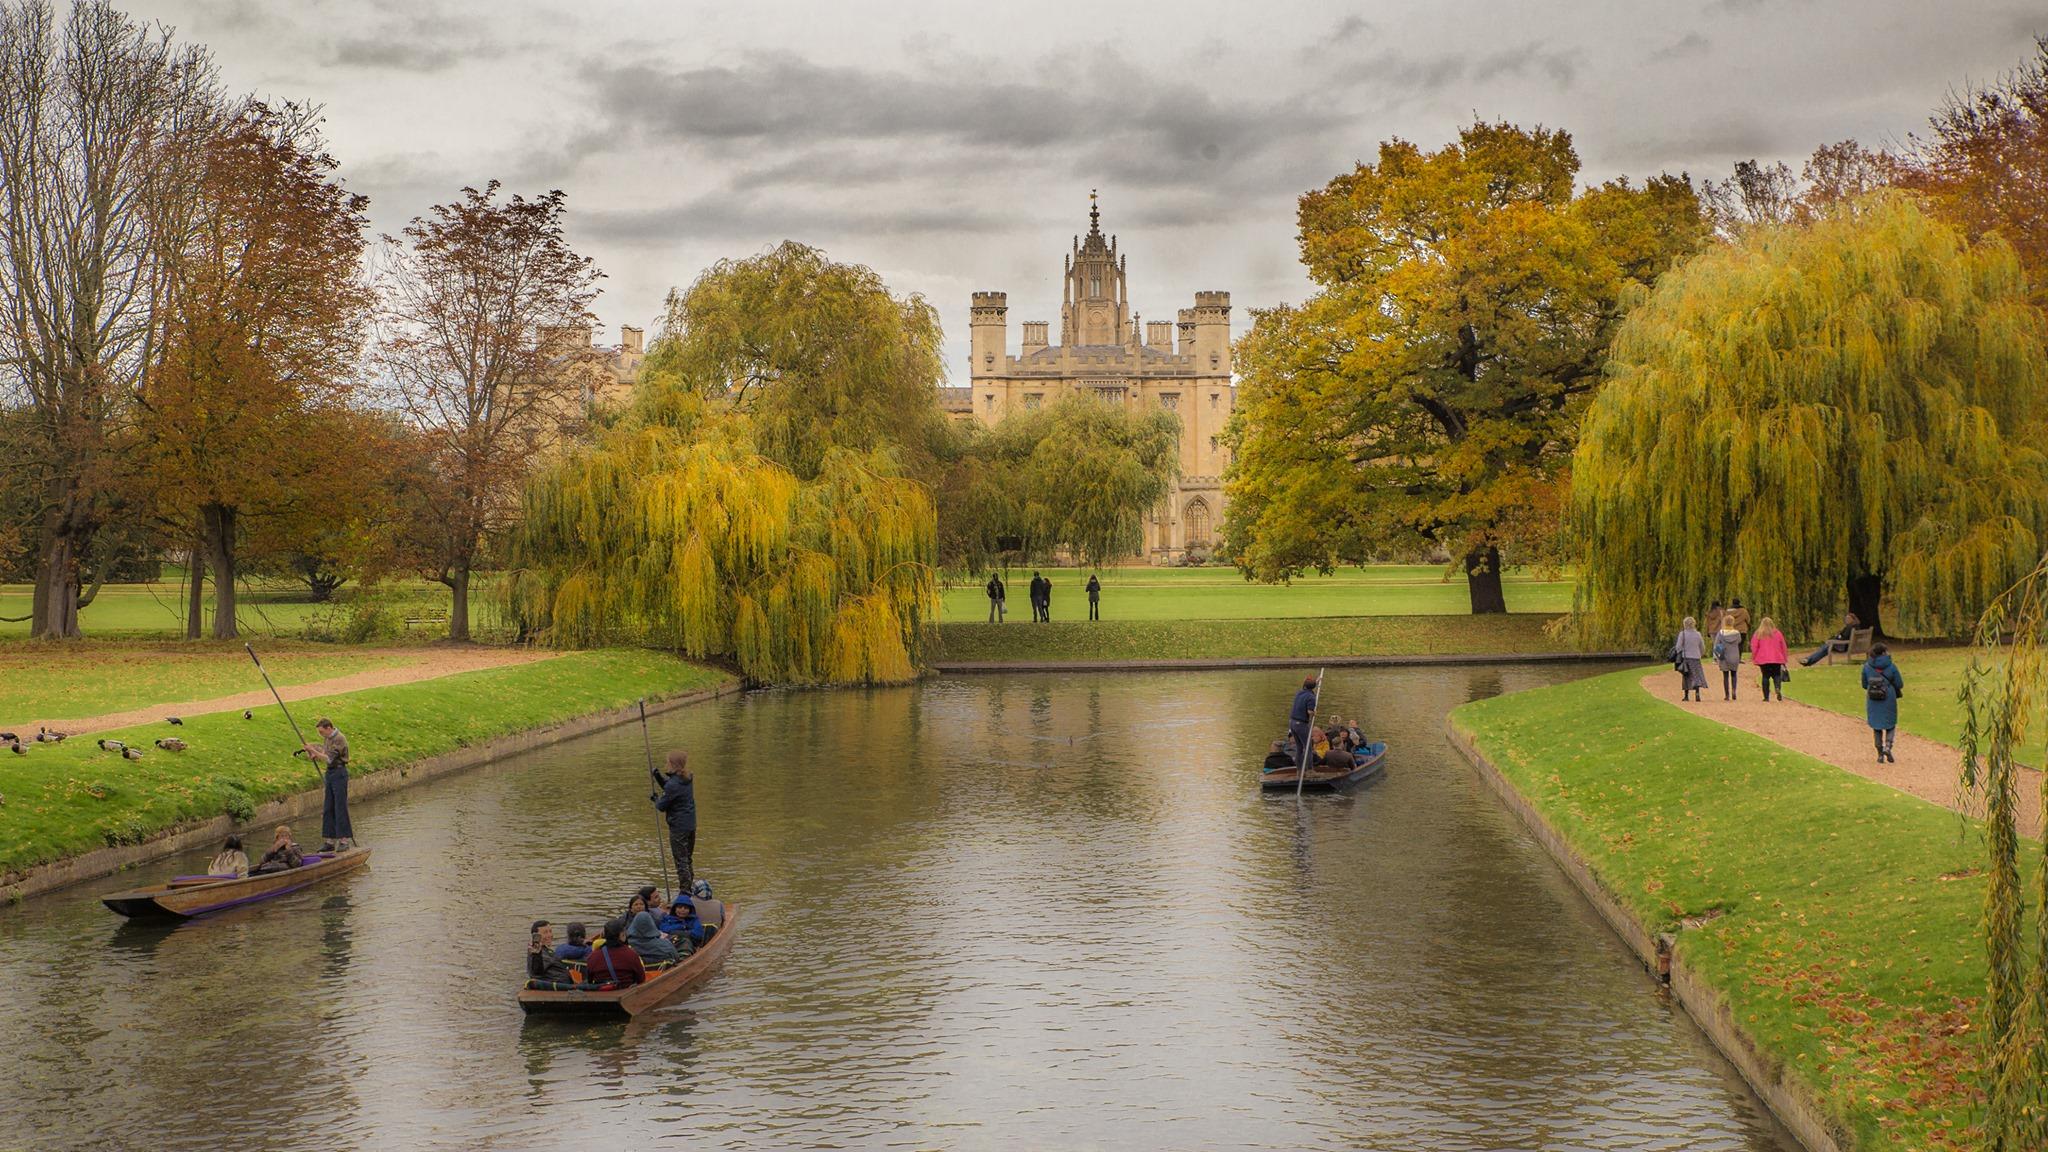 A landscape view of St John's College Cambridge from Trinty  College bridge with punts on the river in the foreground